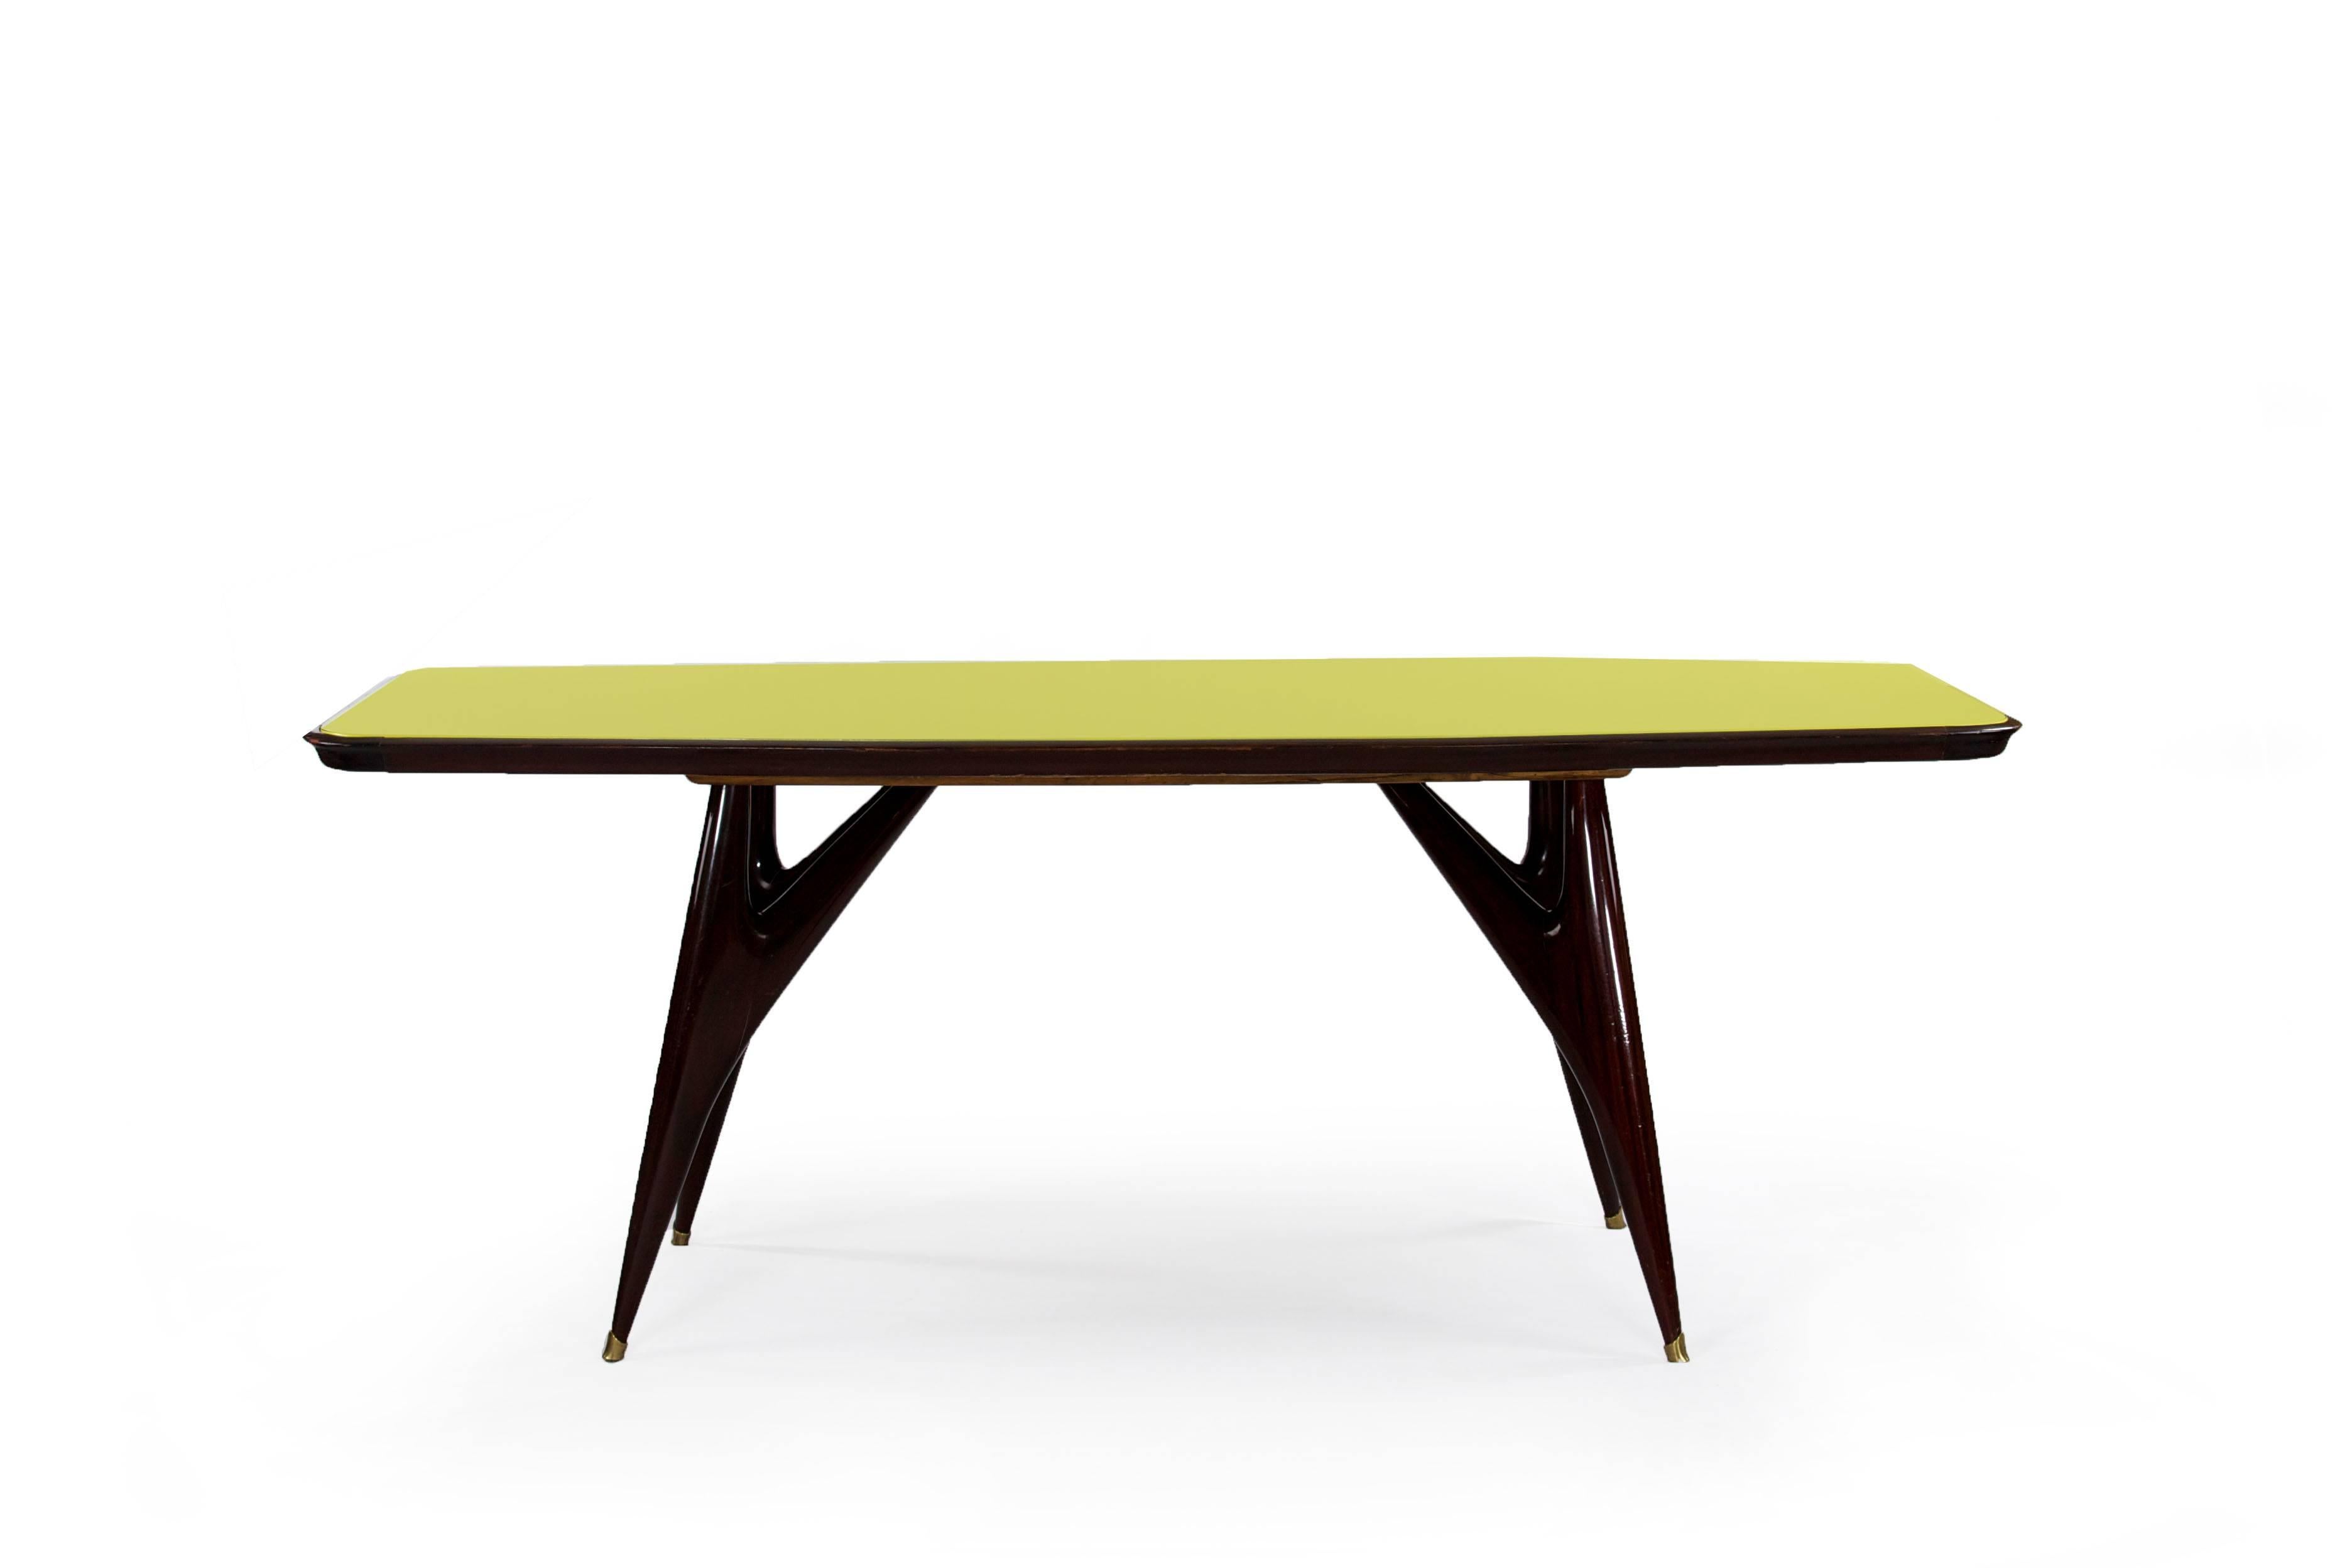 Rosewood dining table with a yellow colored glasstop, Italy, 1950s.